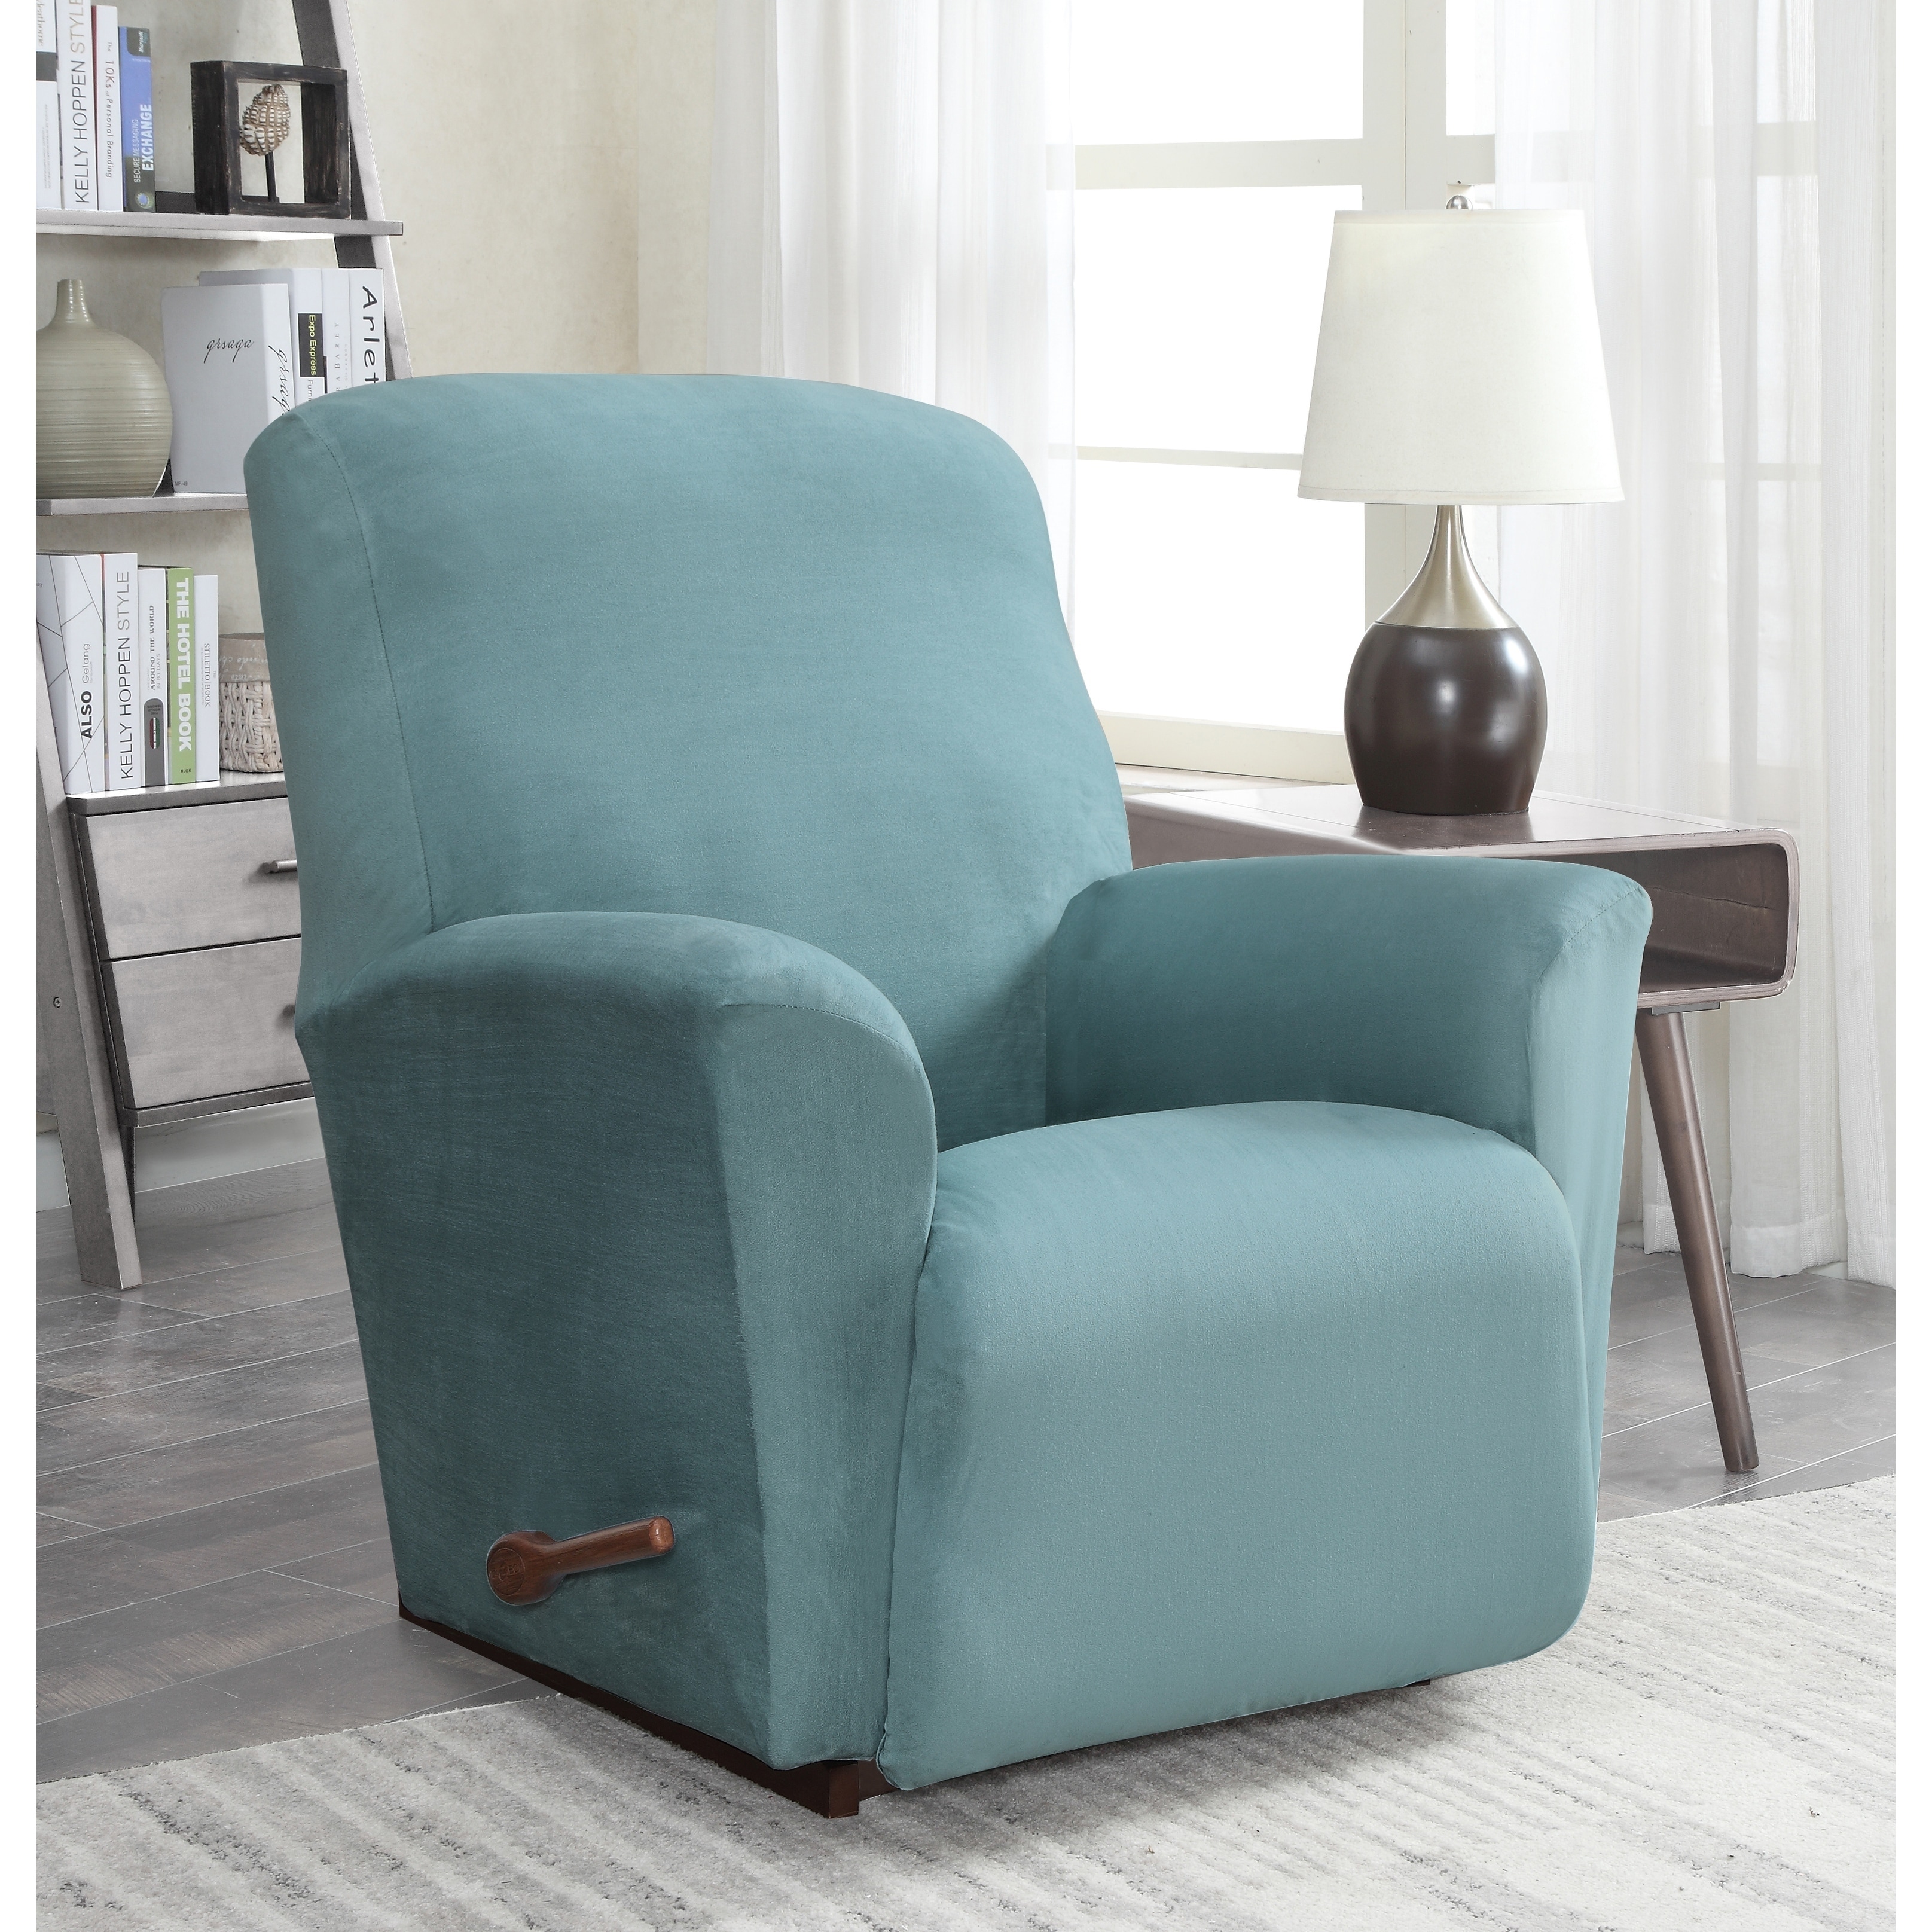 Harper Lane Faux Suede Slipcover for Chair Recliner